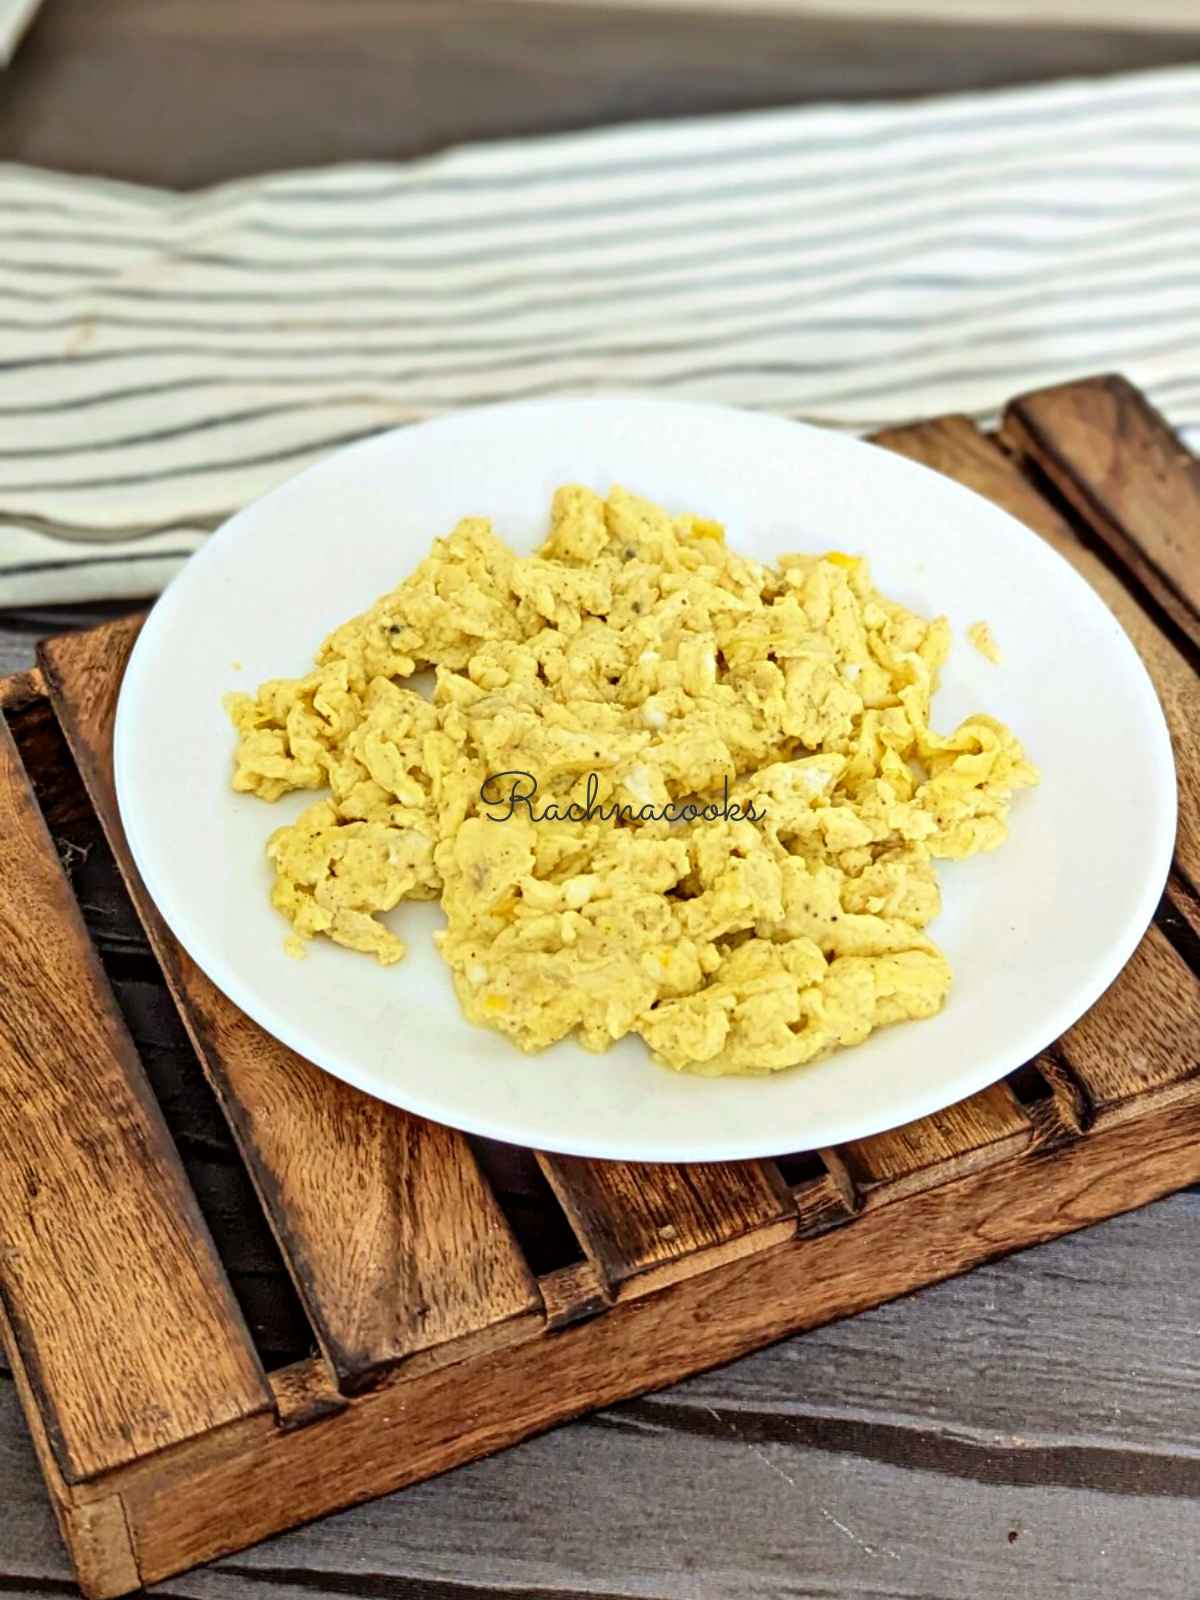 Scrambled eggs served on a white plate.